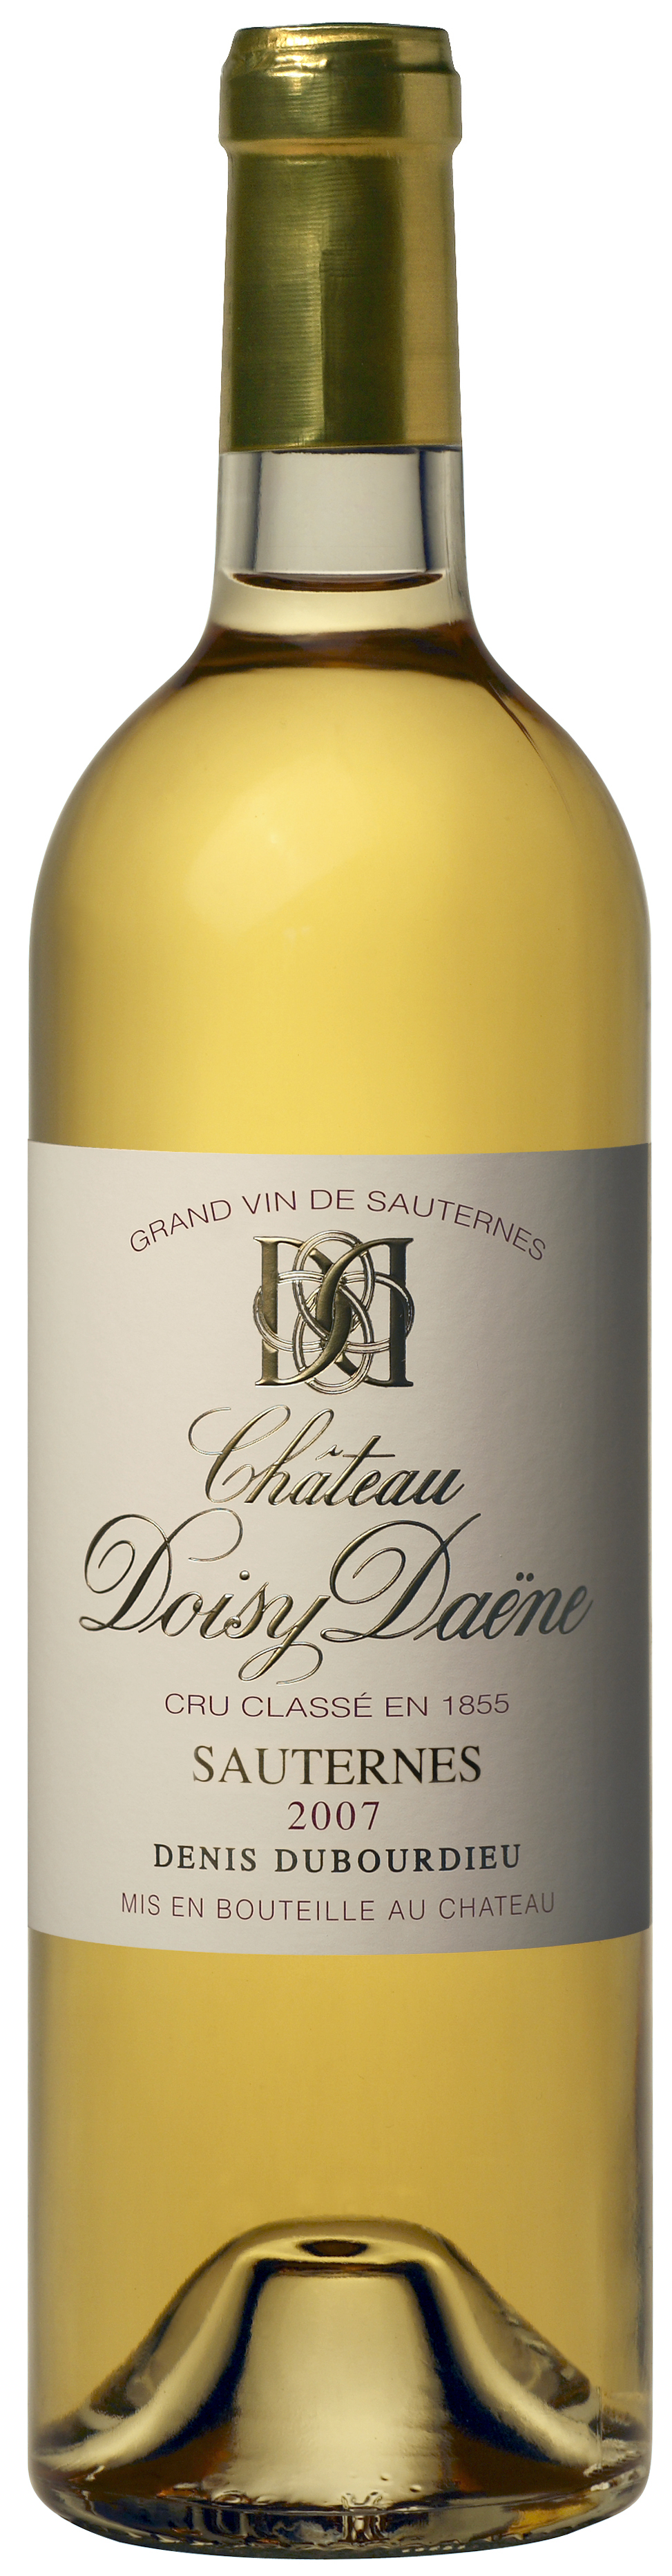 Chateau doisy-vedrines 2018